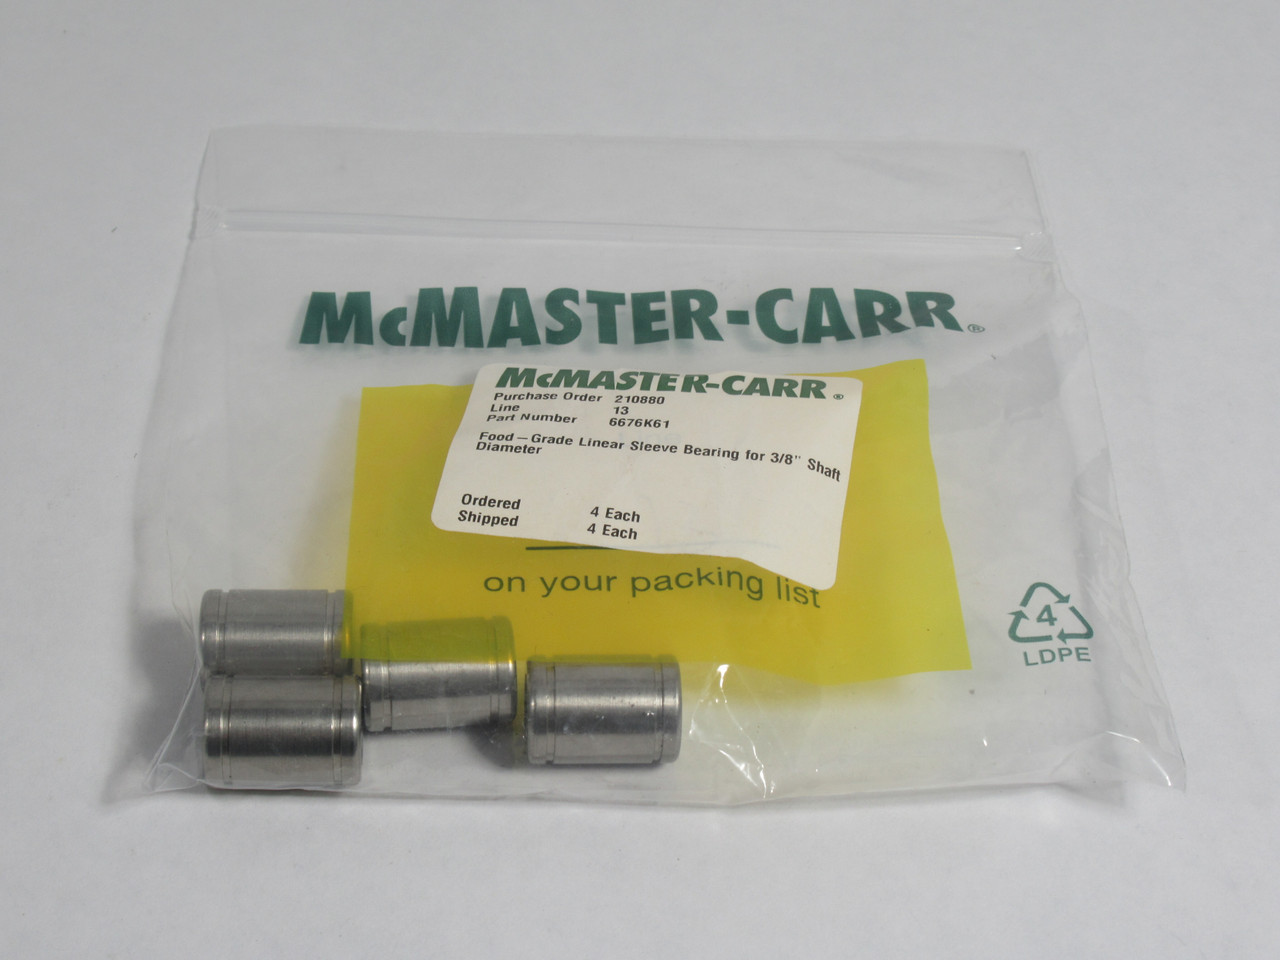 McMaster-Carr 6676K61 Linear Sleeve Bearing for 3/8" Shaft *LOT OF 4* NWB